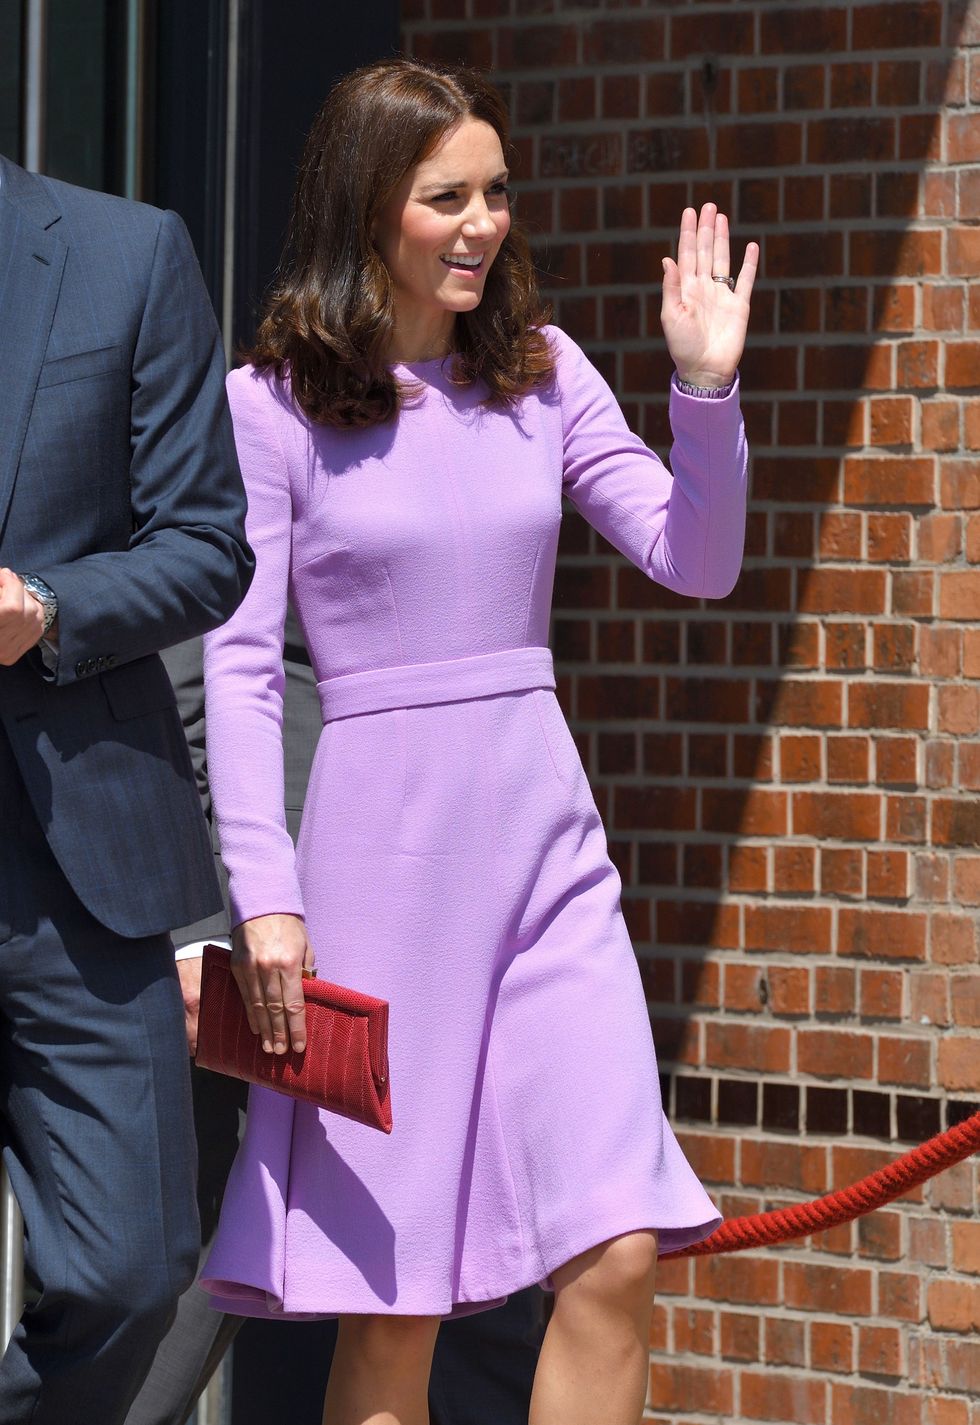 HAMBURG, GERMANY - JULY 21:  Catherine, Duchess of Cambridge visits the Maritime Museum on day 3 of their official visit to Germany on July 21, 2017 in Hamburg, Germany.  (Photo by Karwai Tang/WireImage)